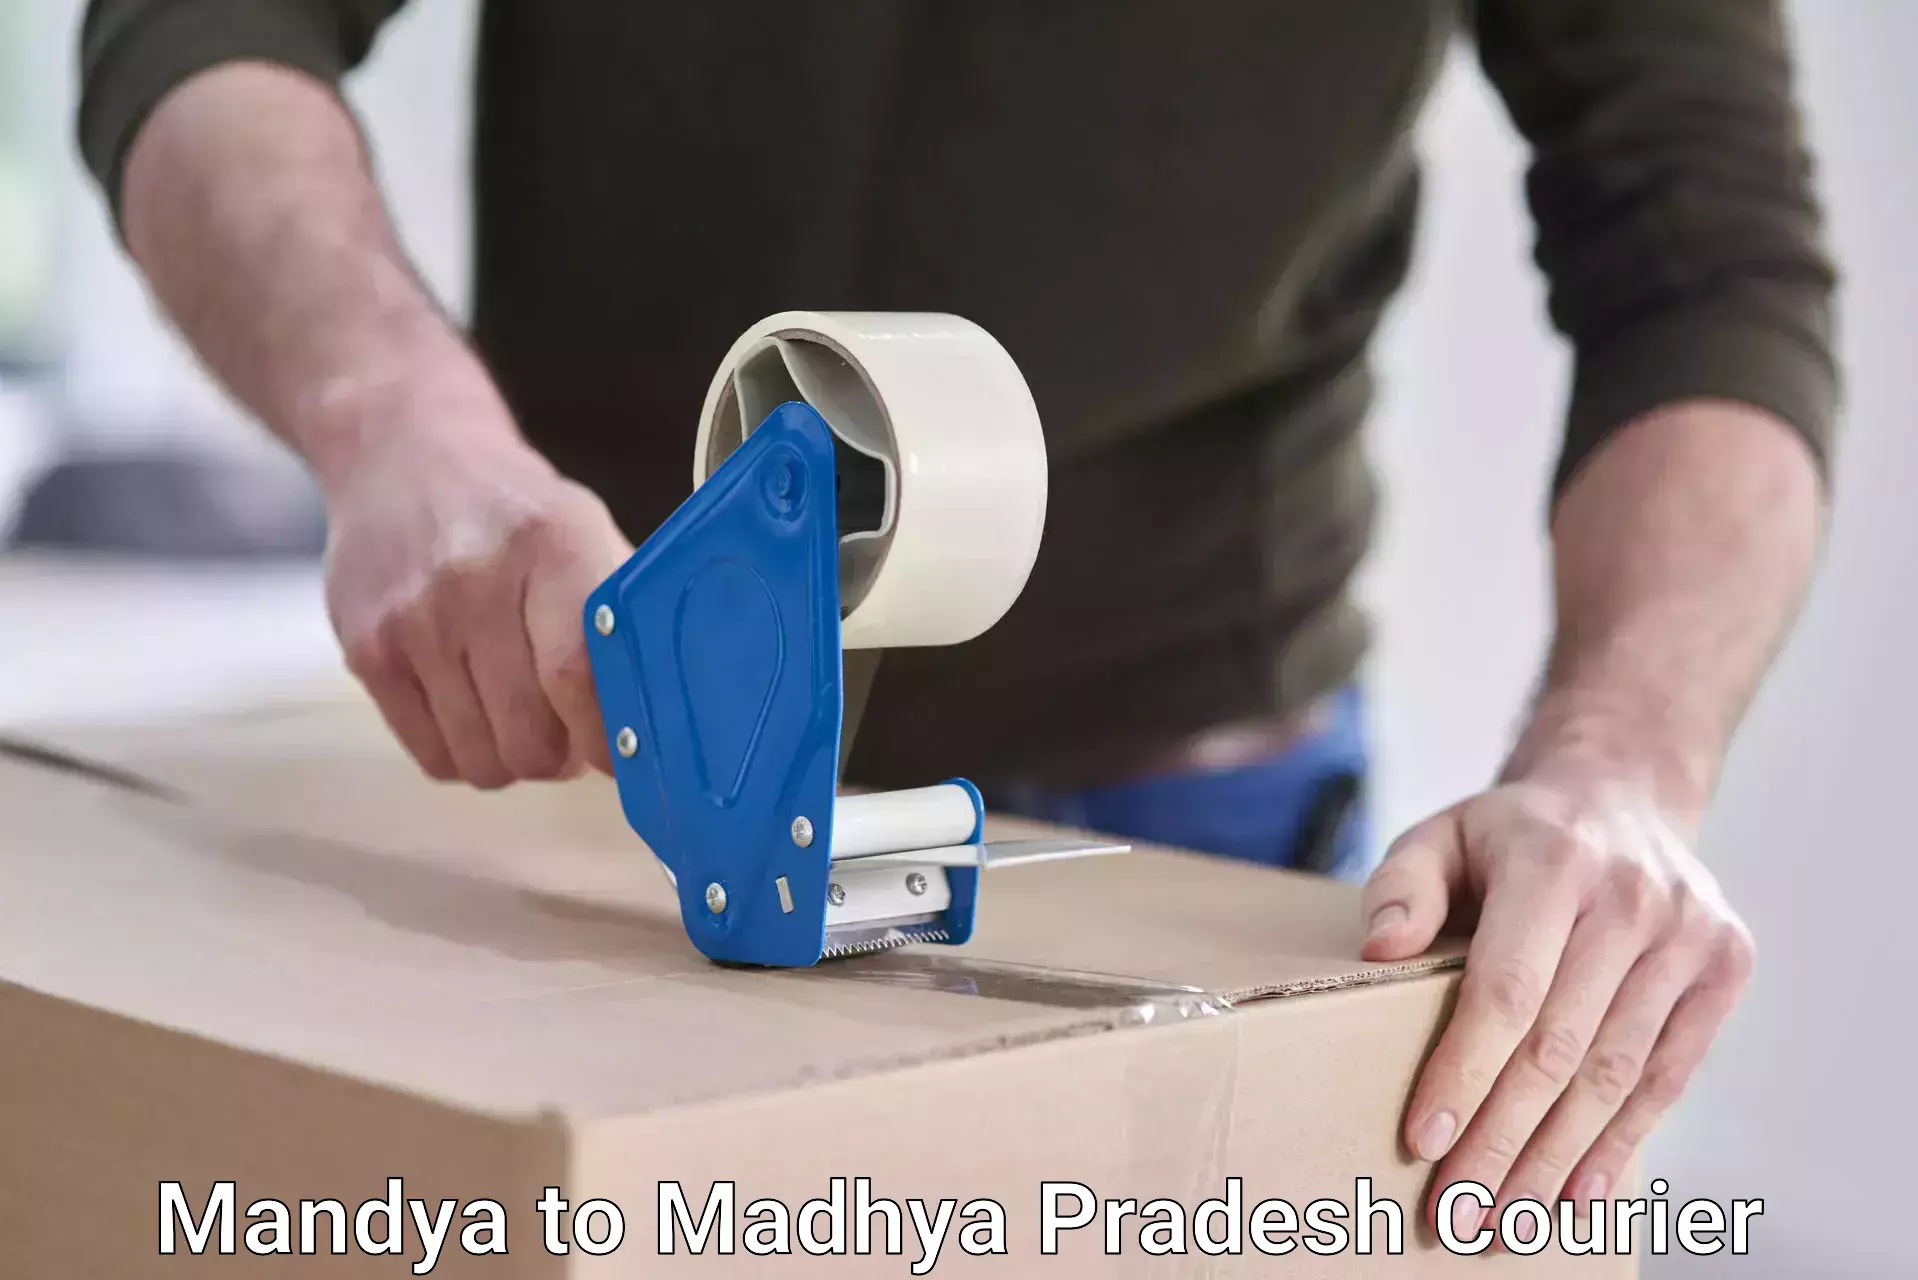 Flexible delivery scheduling Mandya to Harda